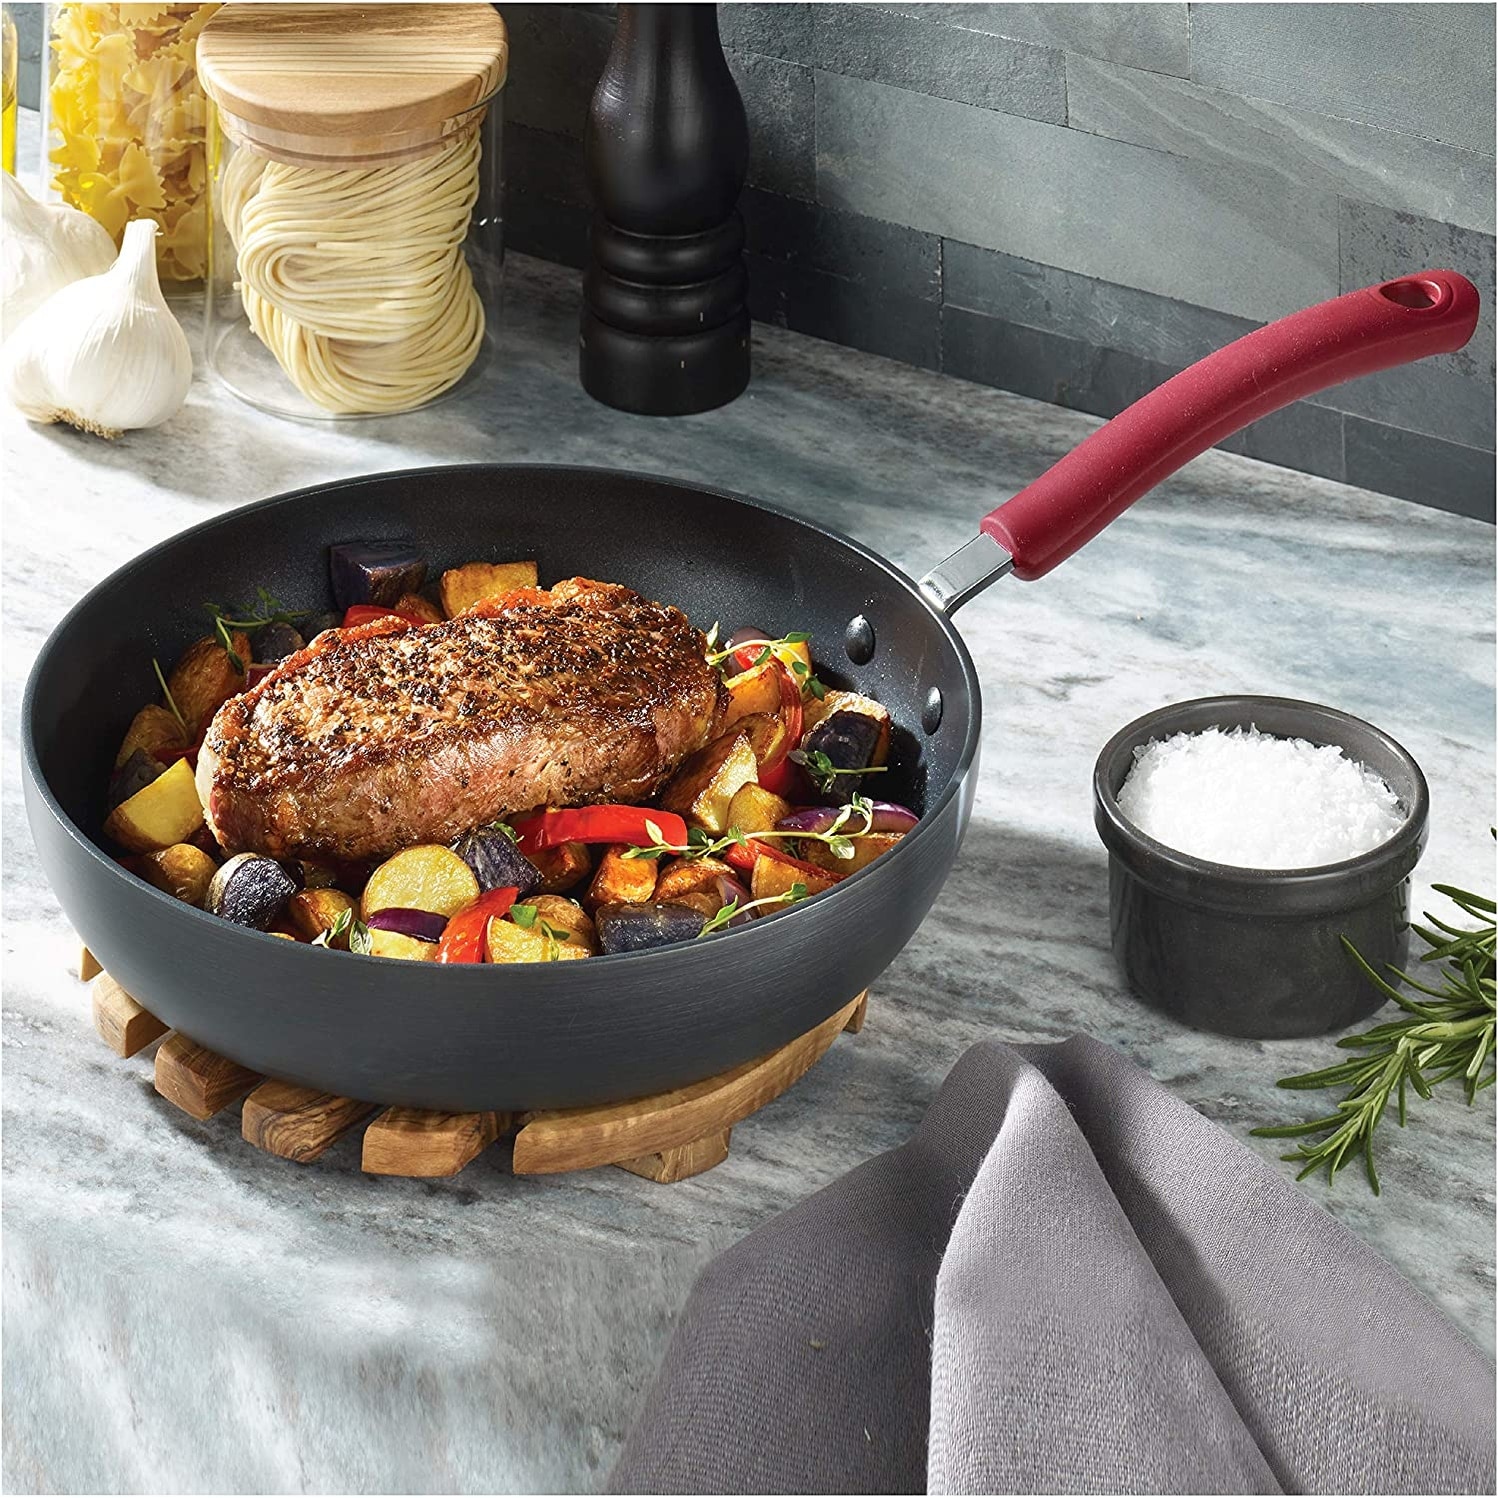 https://ak1.ostkcdn.com/images/products/is/images/direct/1f41b709dc76a48a62af1a0a72061e526323b4ce/T-fal-Advanced-Nonstick-Cookware-Set-12-Piece-Pots-and-Pans%2C-Dishwasher-Safe-Black.jpg